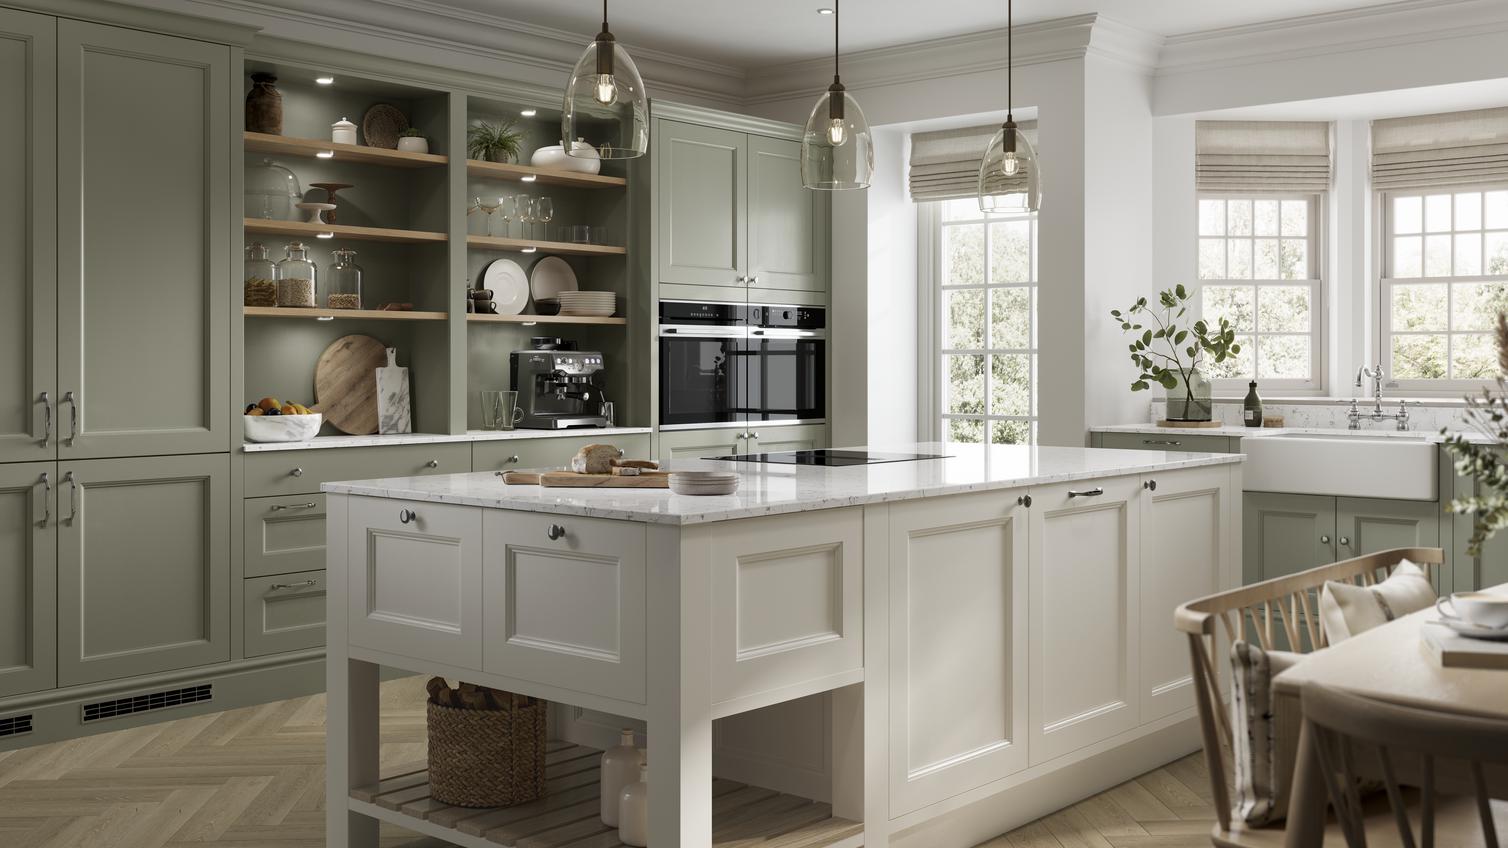 A sage-green shaker kitchen idea with an ivory island. Has white worktops, open shelving, chevron floors, and brass handles.